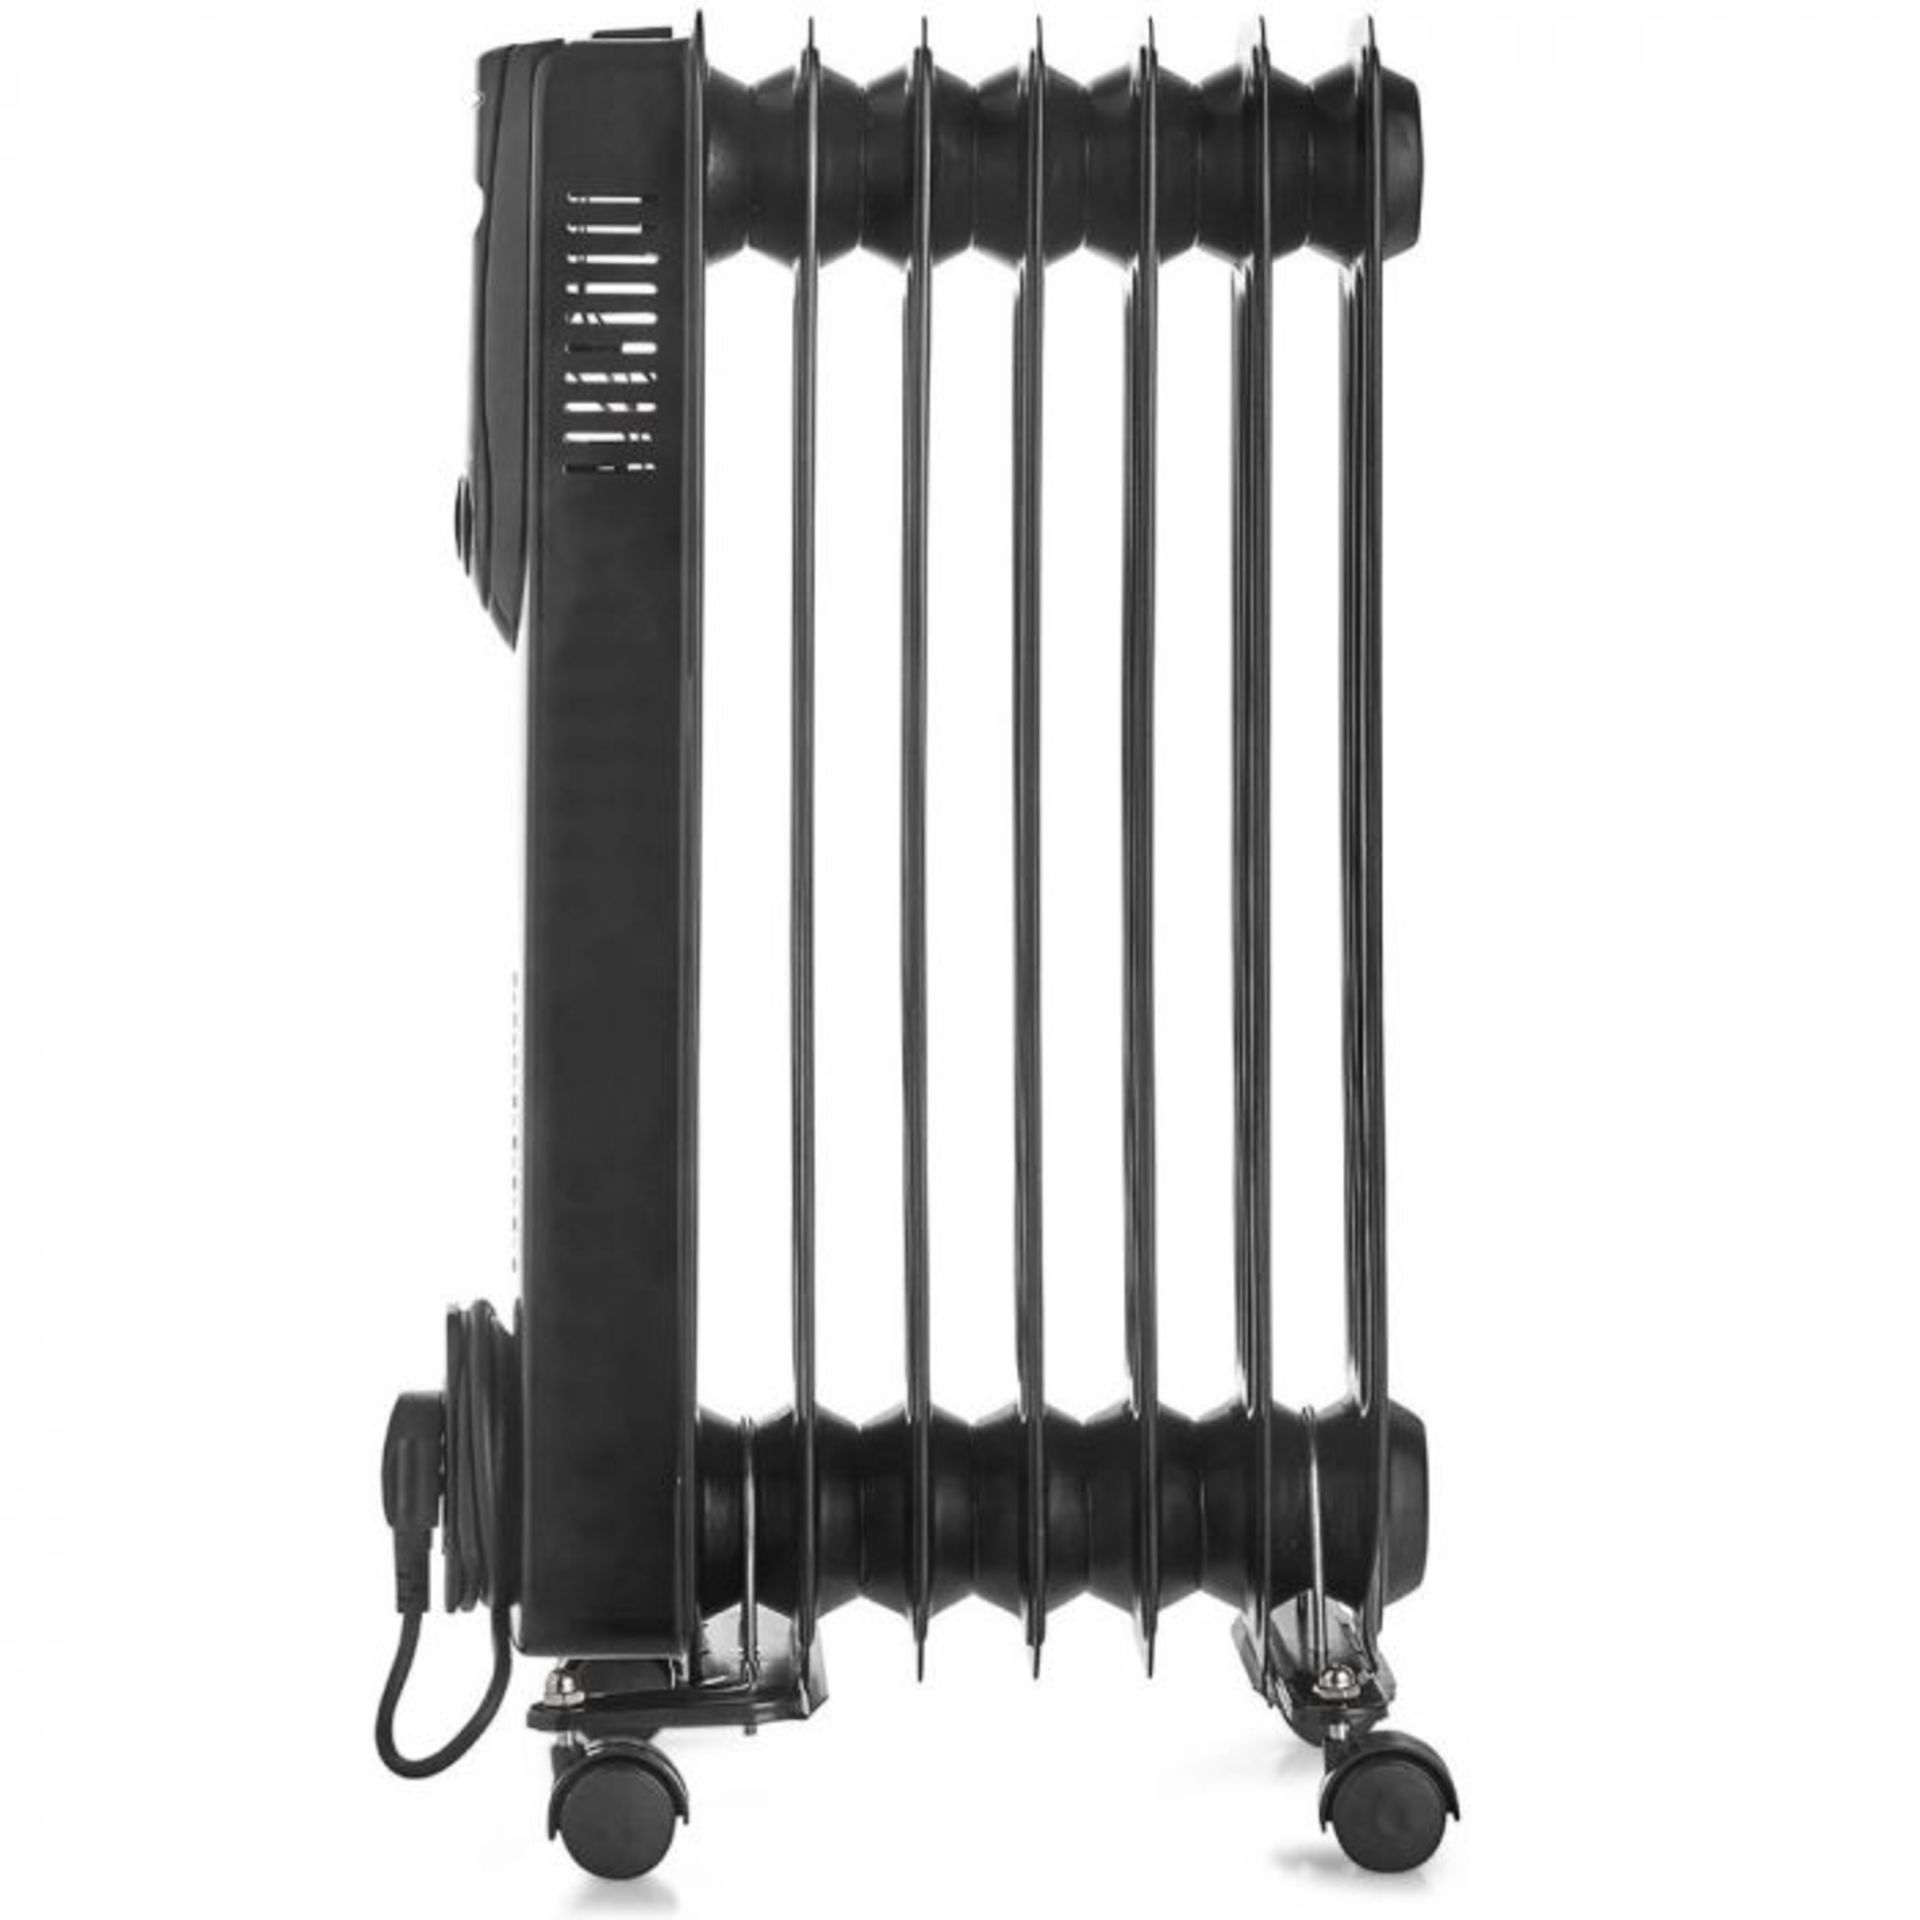 (NN13) 7 Fin 1500W Oil Filled Radiator - Black Powerful 1500W radiator with 7 oil-filled fins ... - Image 3 of 3